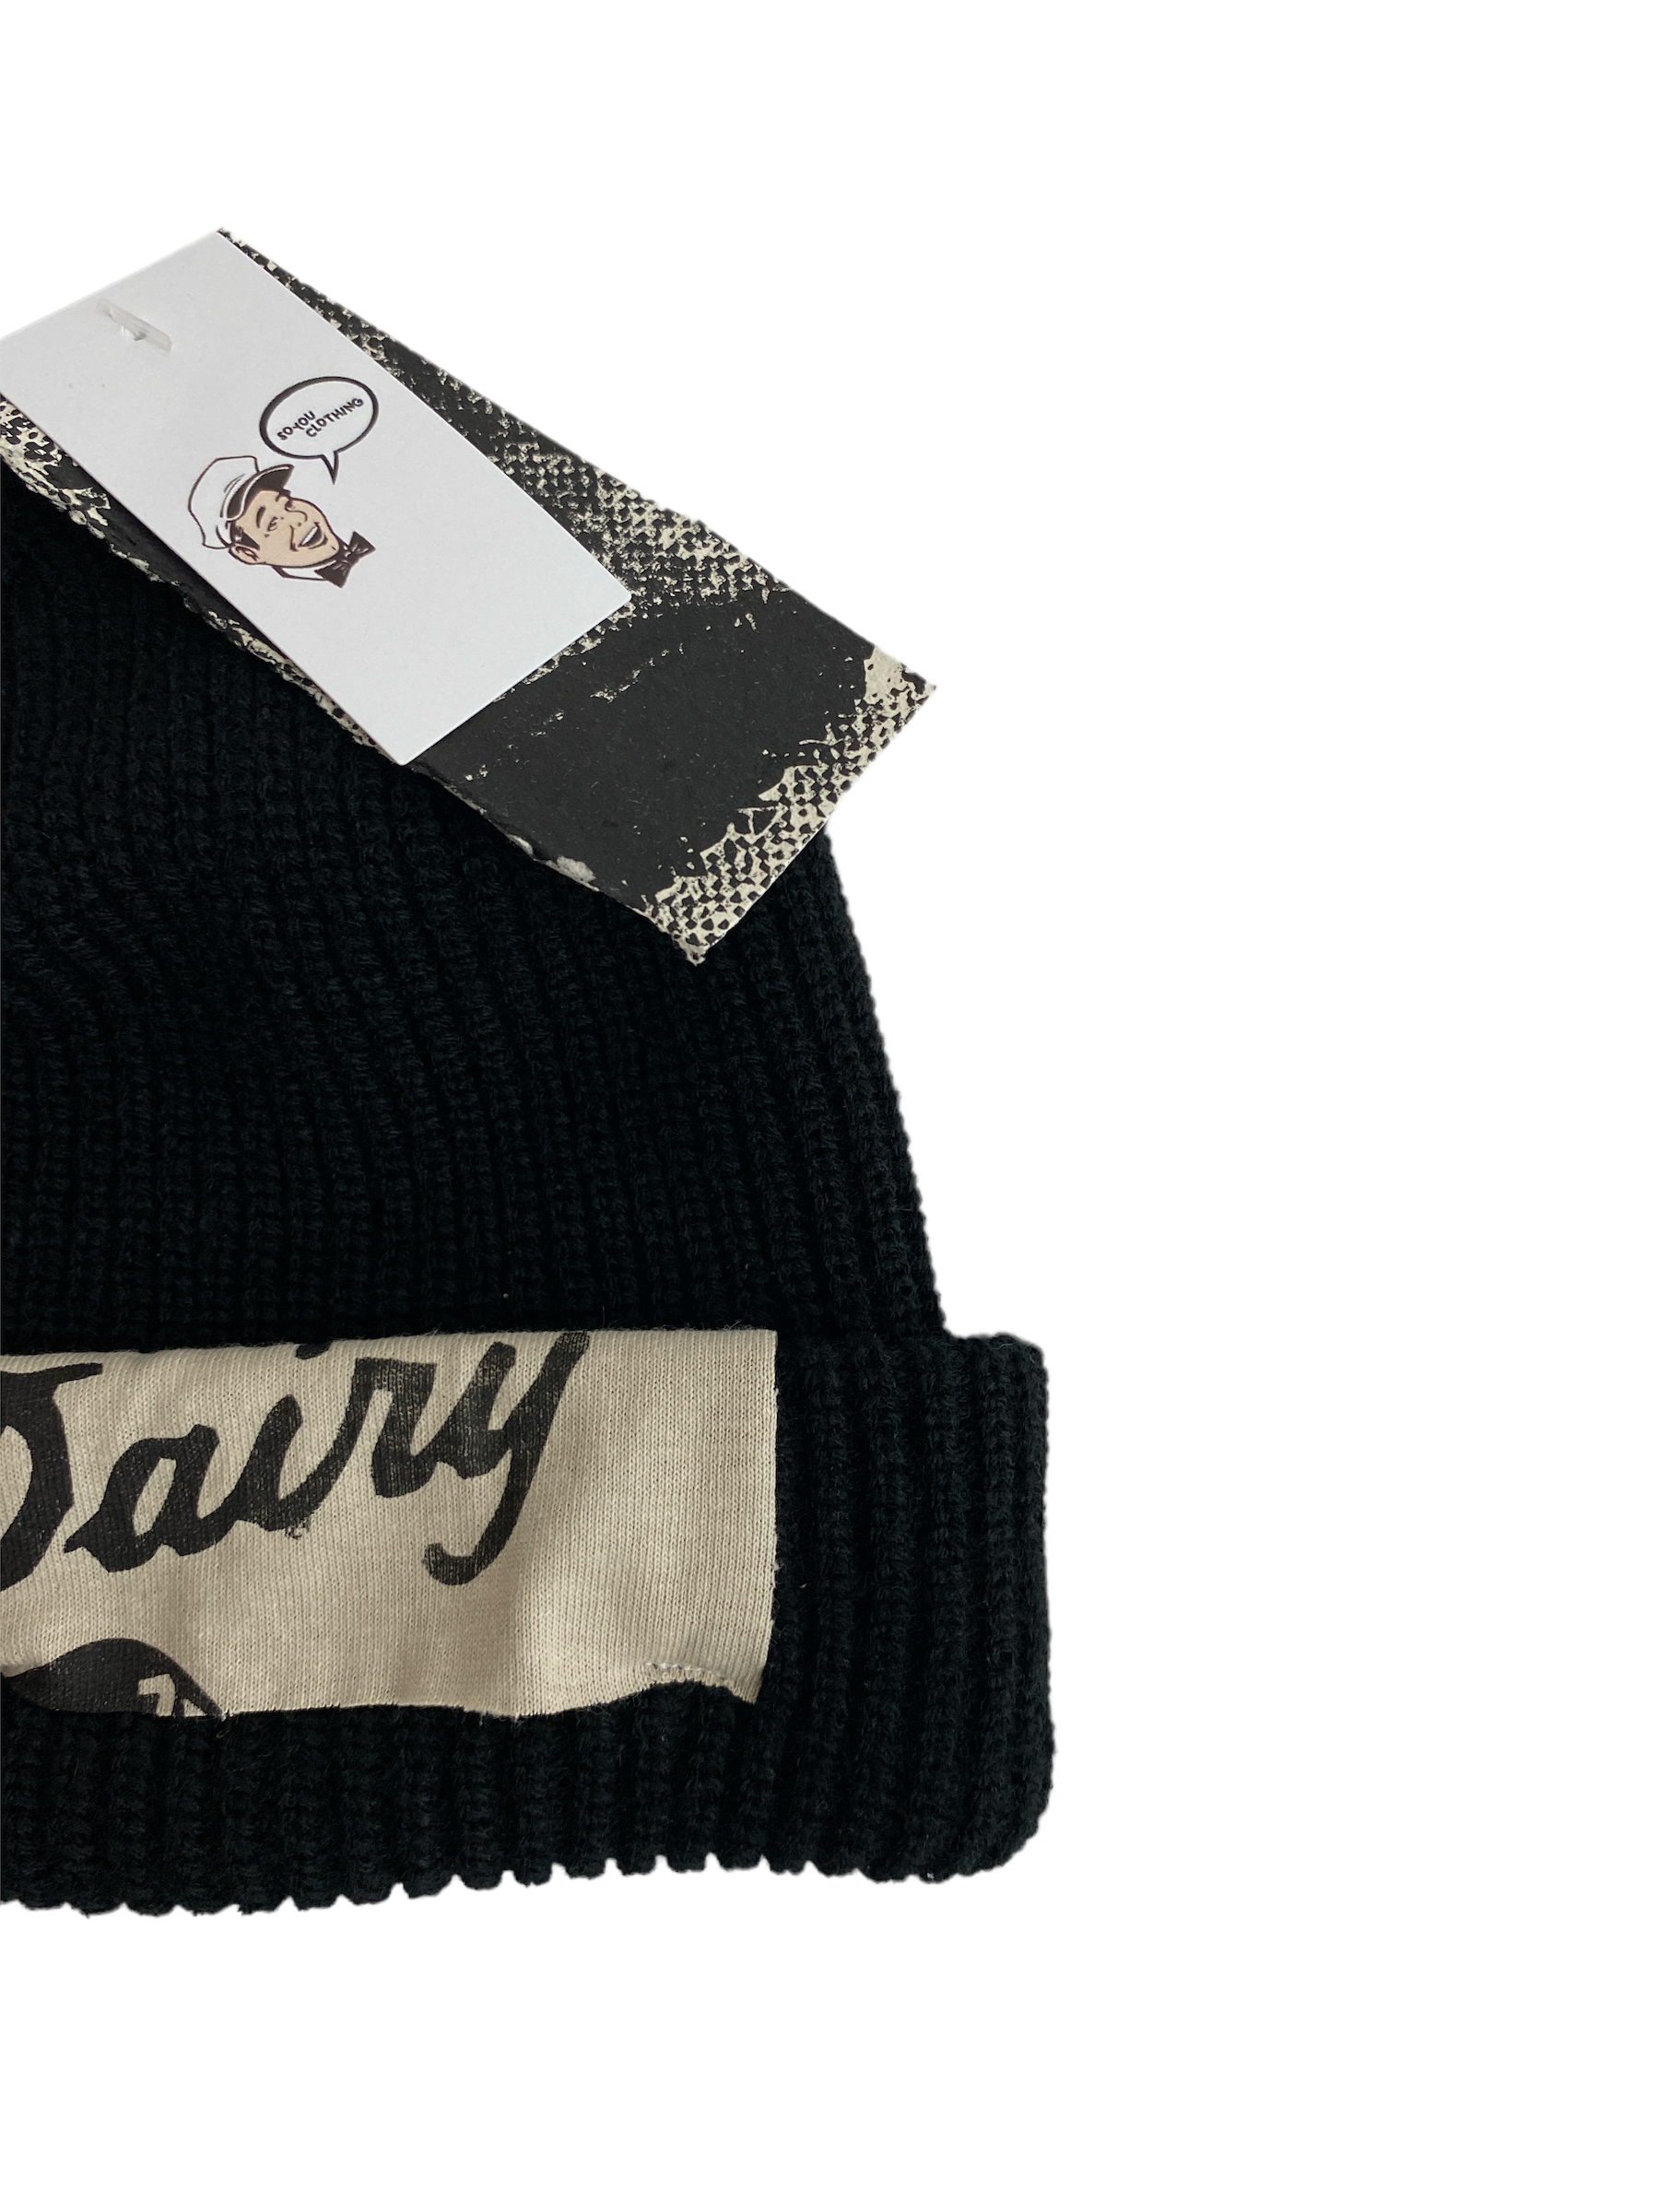 SoYou X Teetz World Ribbed Tuque